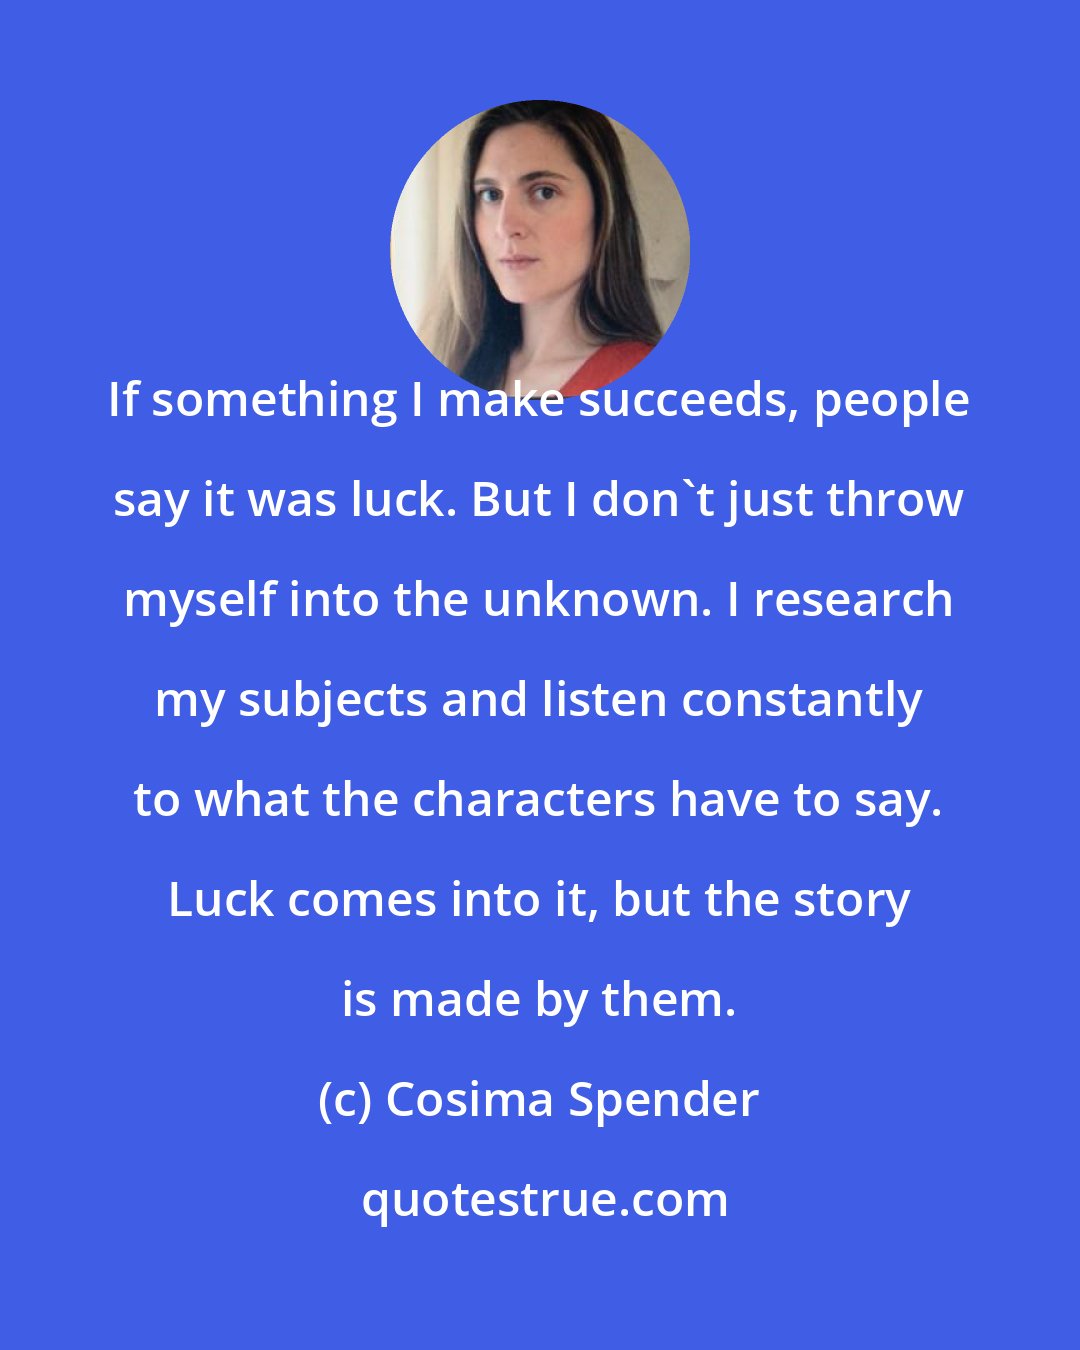 Cosima Spender: If something I make succeeds, people say it was luck. But I don't just throw myself into the unknown. I research my subjects and listen constantly to what the characters have to say. Luck comes into it, but the story is made by them.